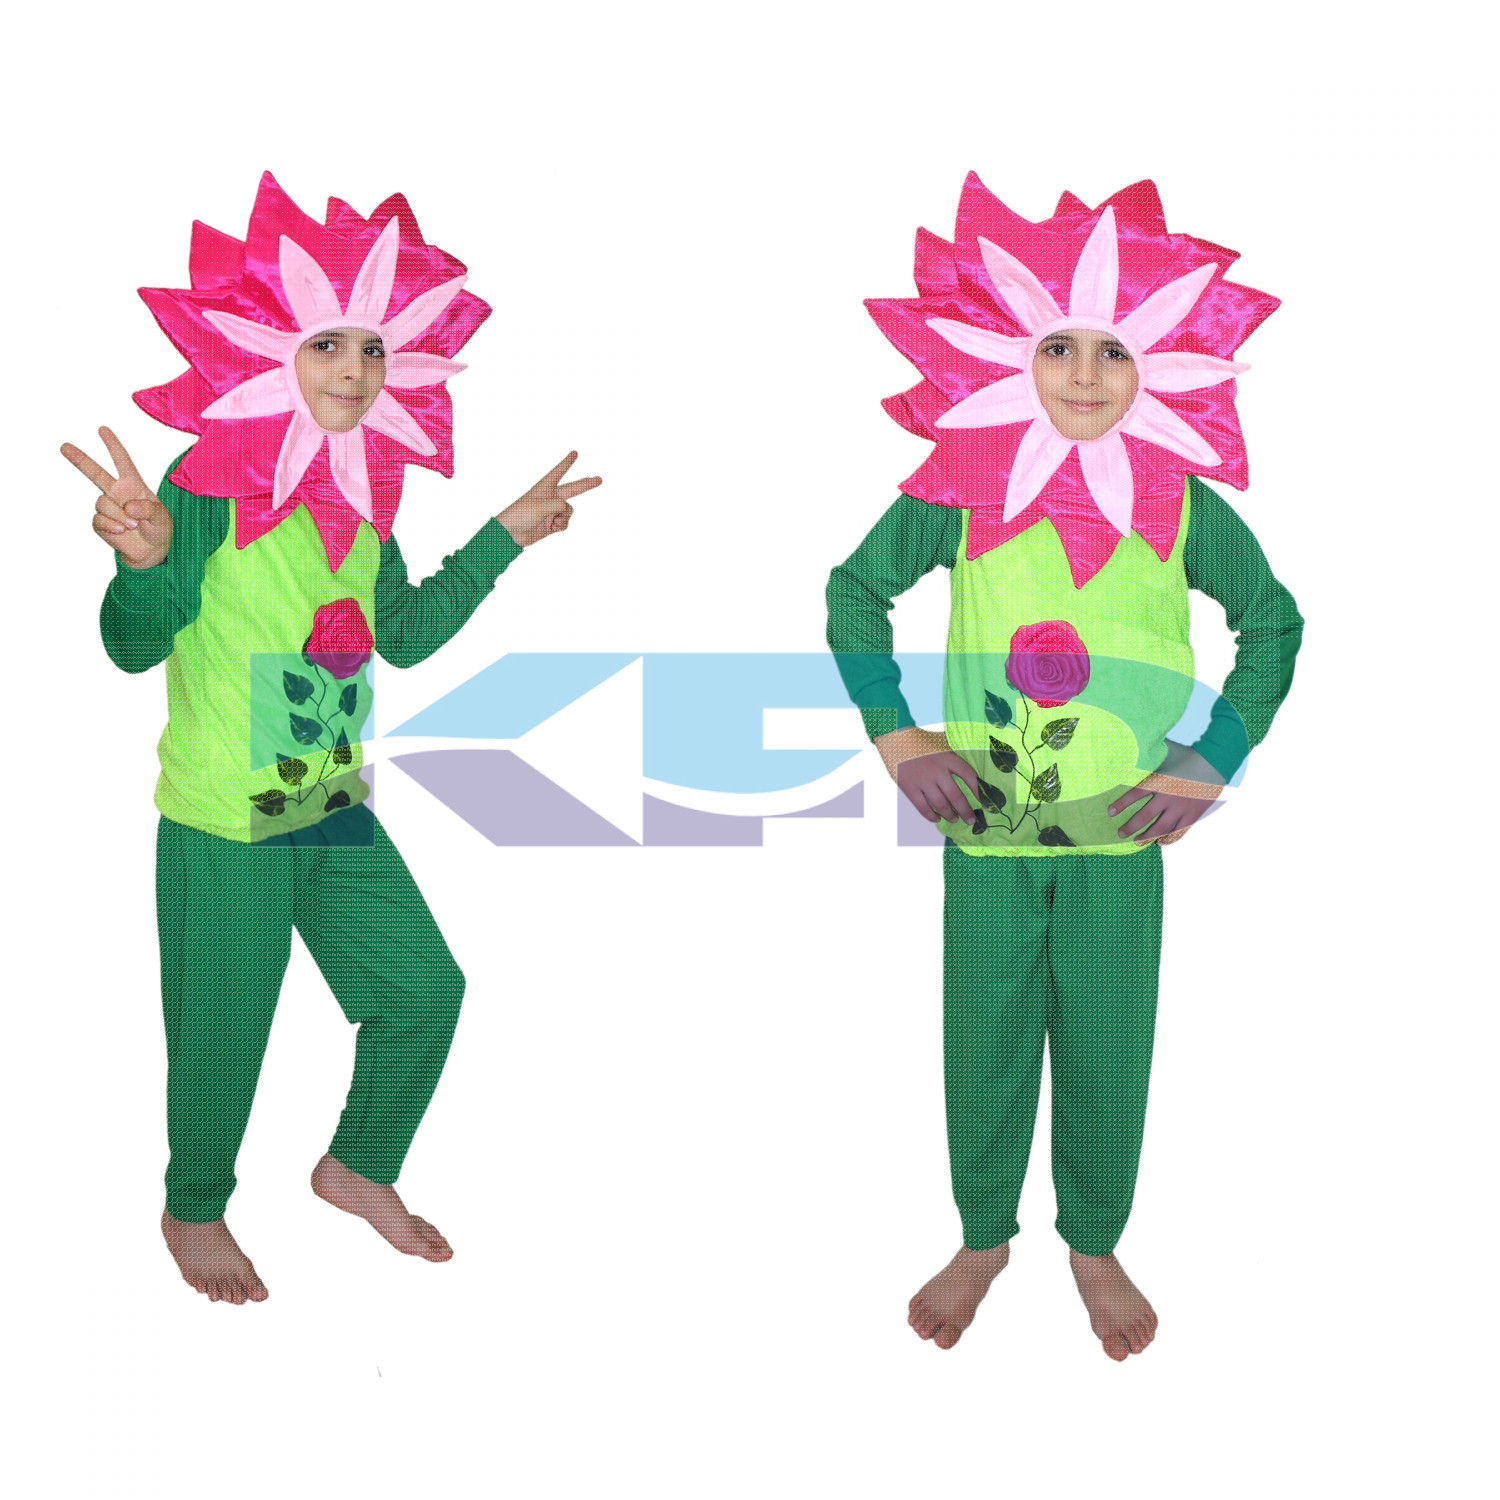 Mazanta Flower with track suit Costume,Rose Costume,Nature Costume For School Annual function/Theme Party/Competition/Stage Shows/Birthday Party Dress